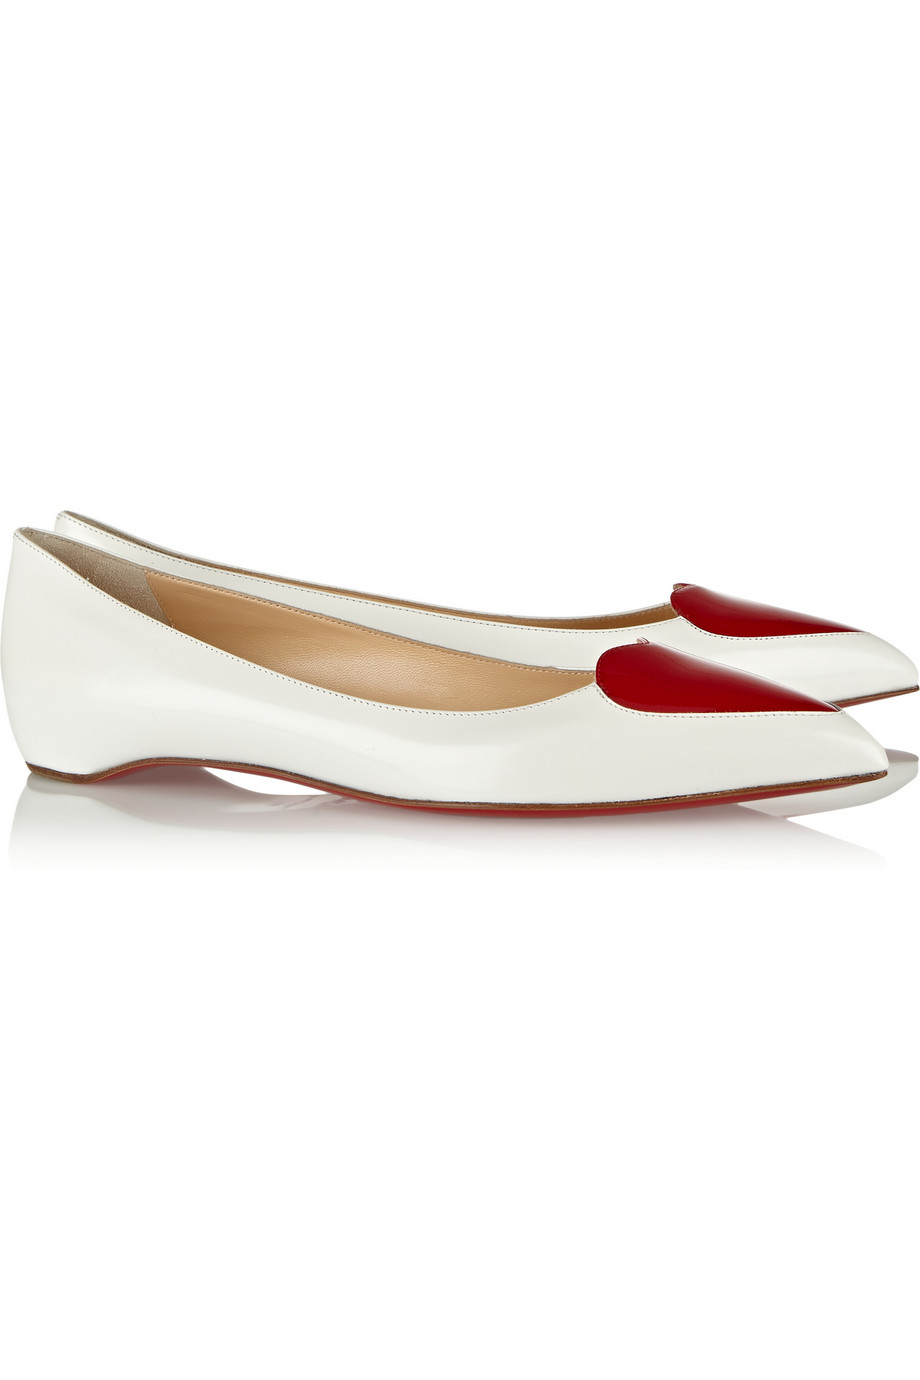 replica louboutin uk - Christian louboutin Corafront Patent-Leather Point-Toe Flats in ...